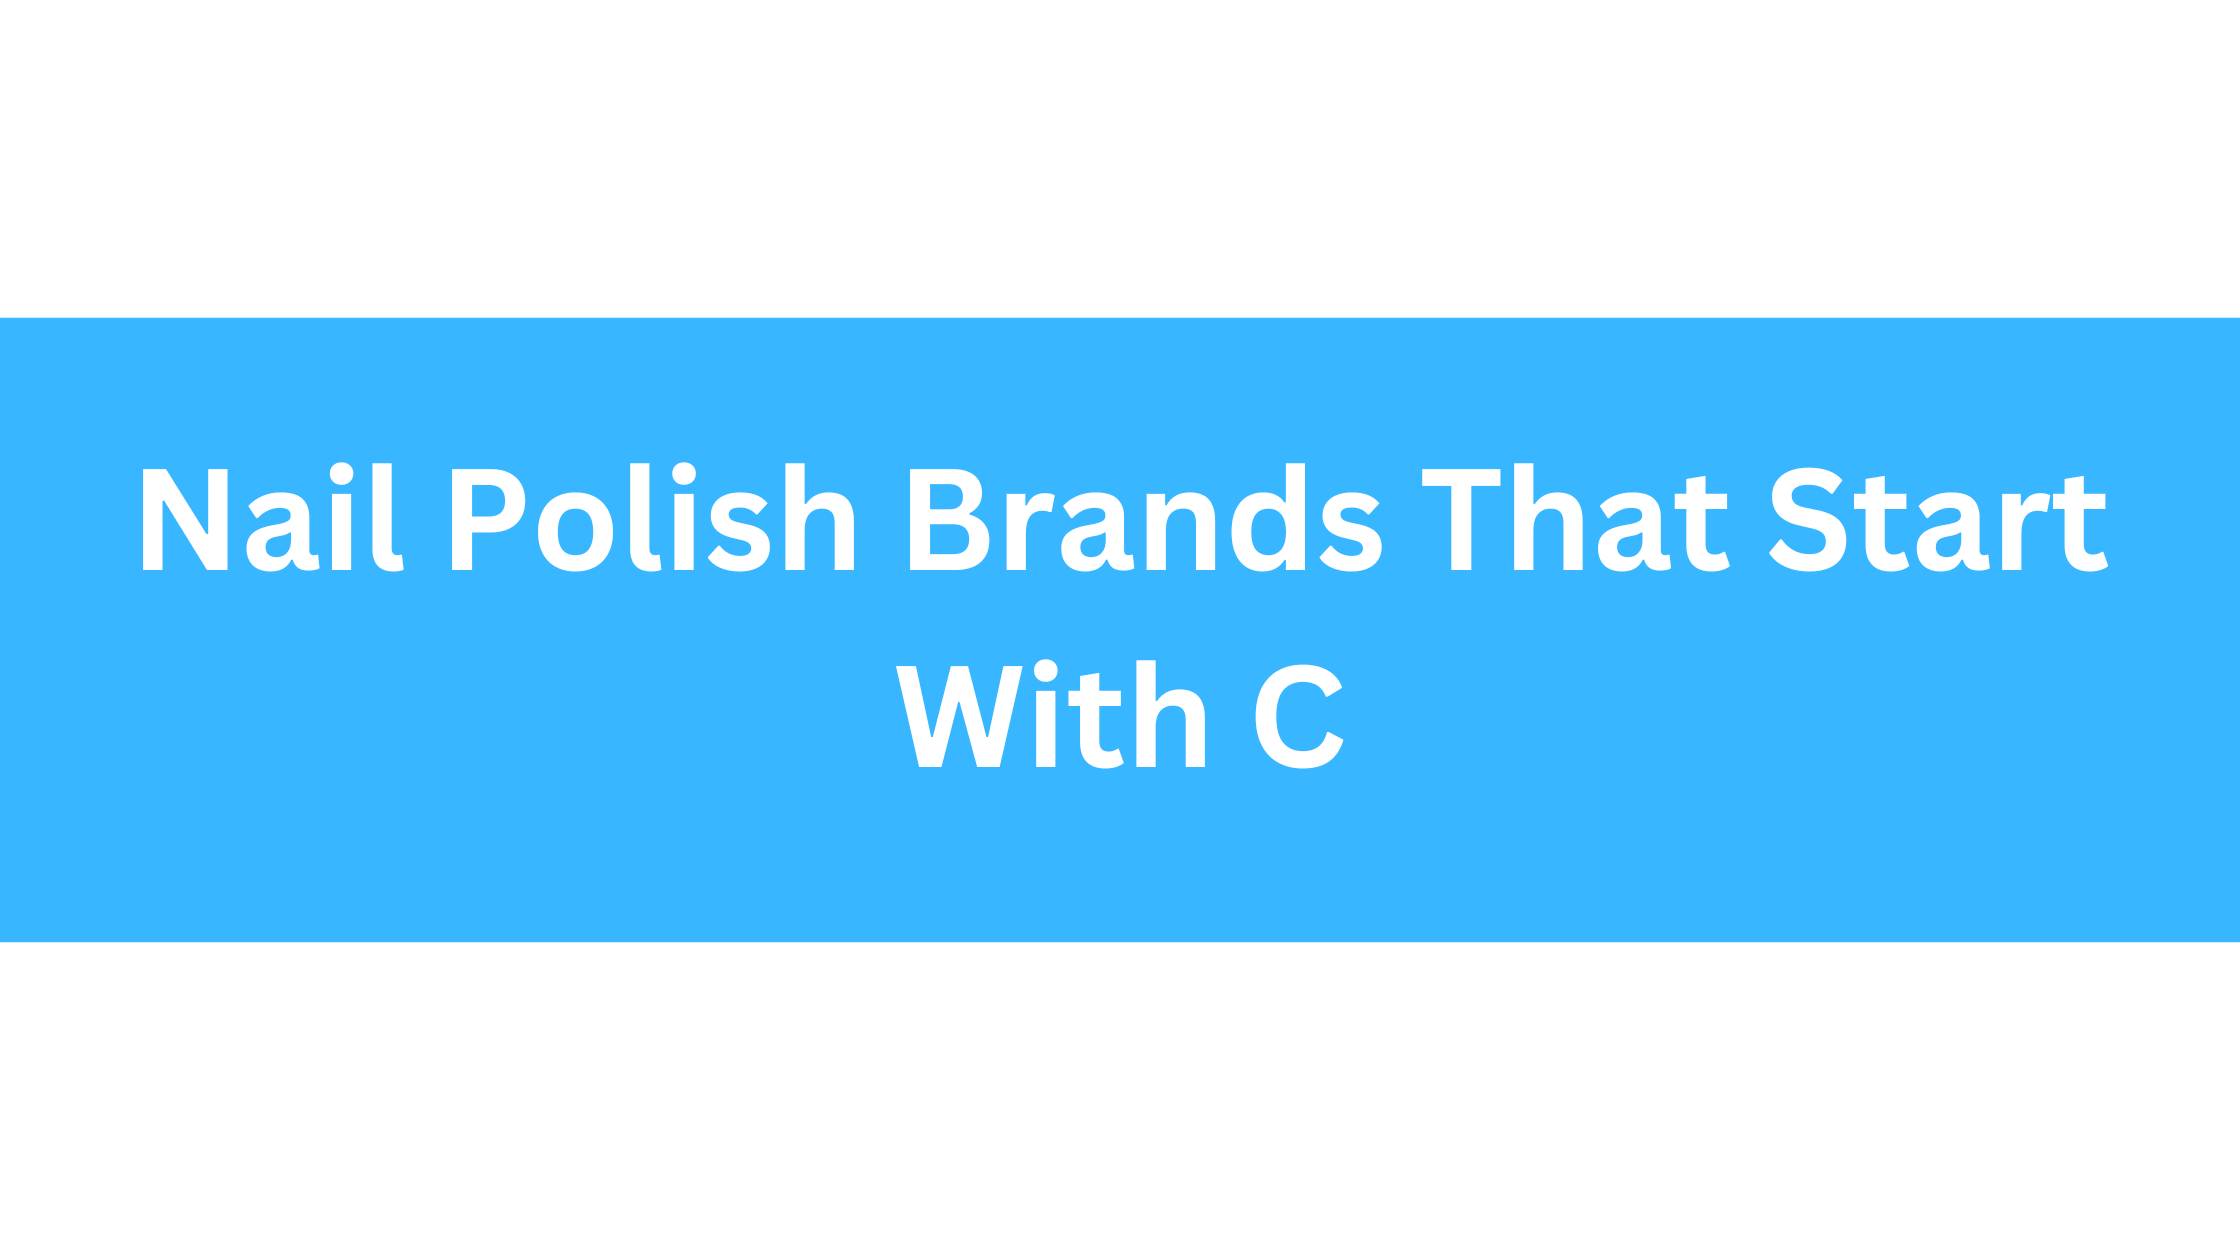 Nail Polish Brands That Start With C